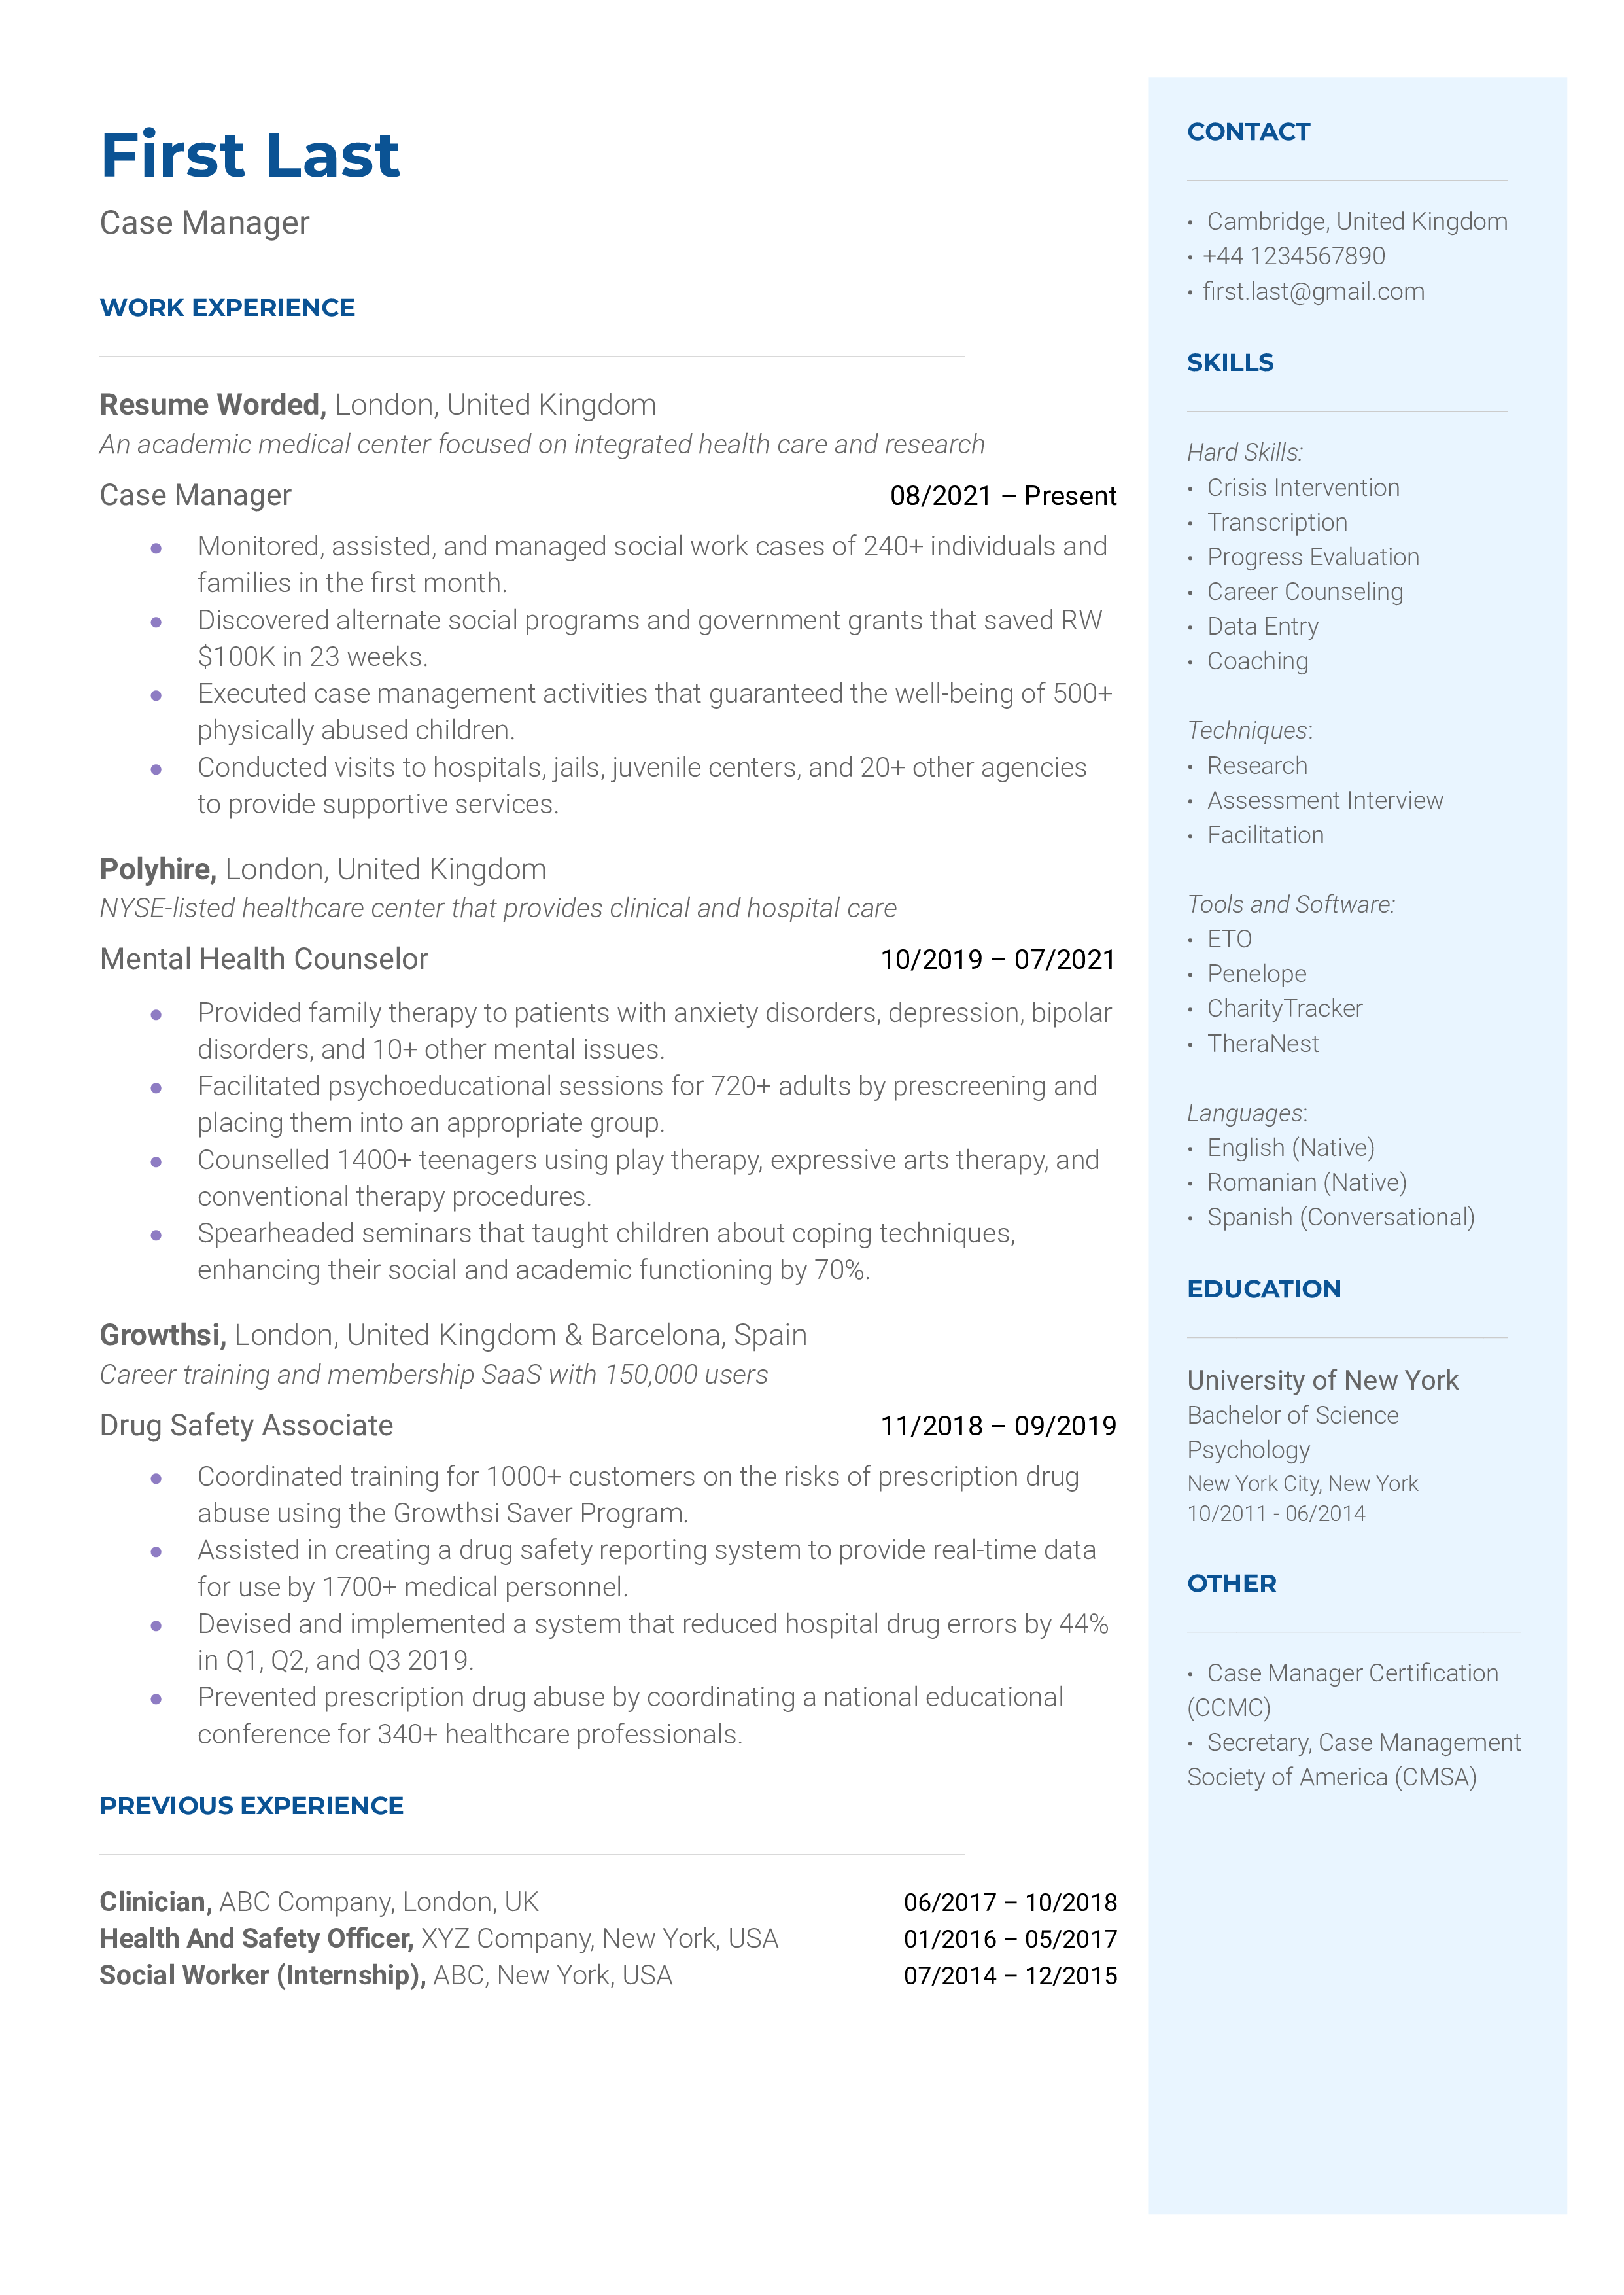 A CV screenshot highlighting qualifications and experience for a Case Manager role.